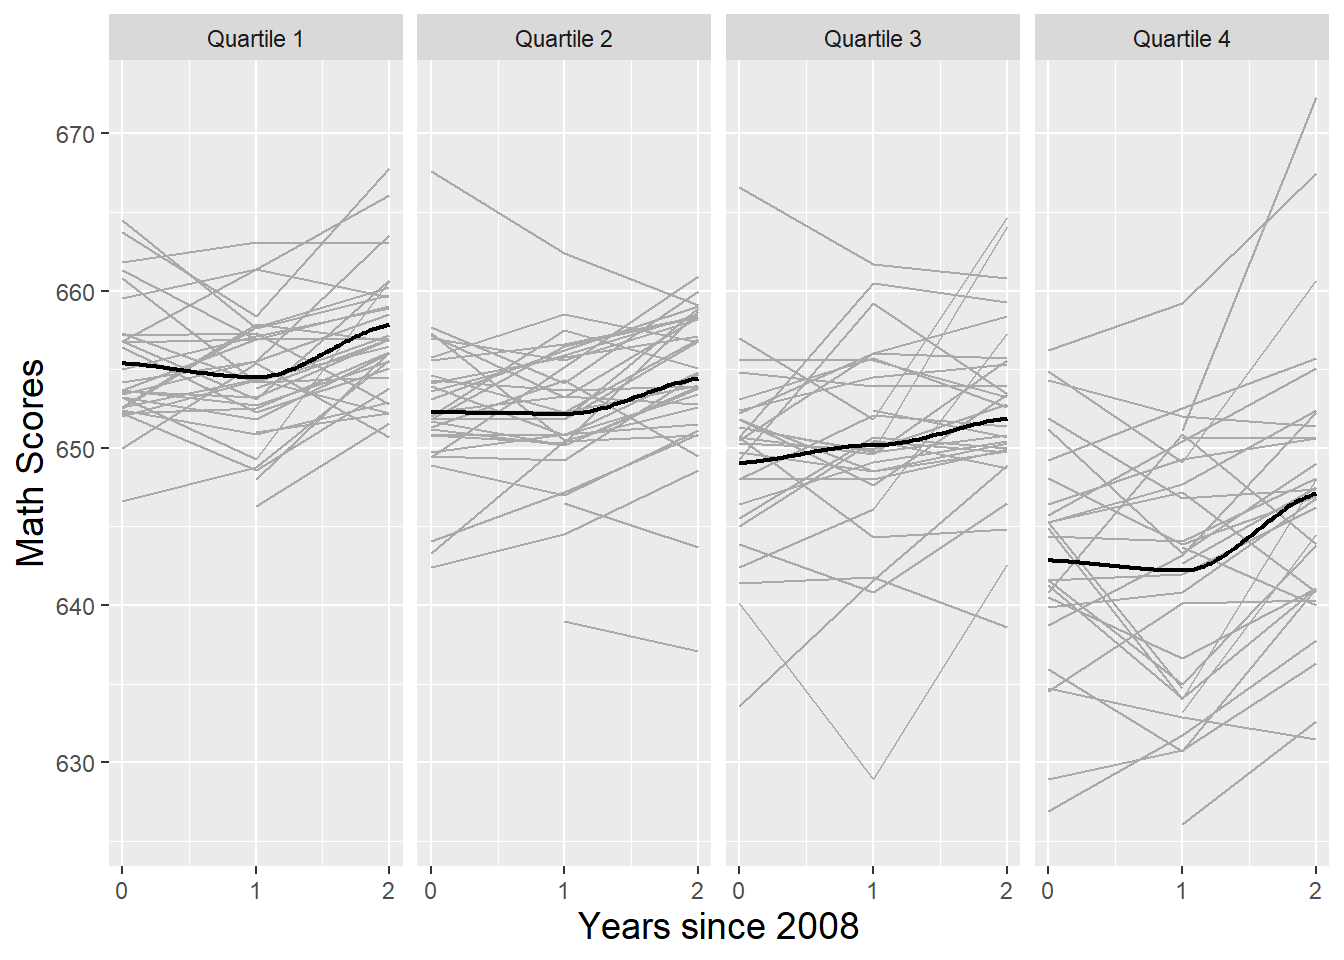 Spaghetti plots showing time trends for each school by quartiles of percent free and reduced lunch, with loess fits.